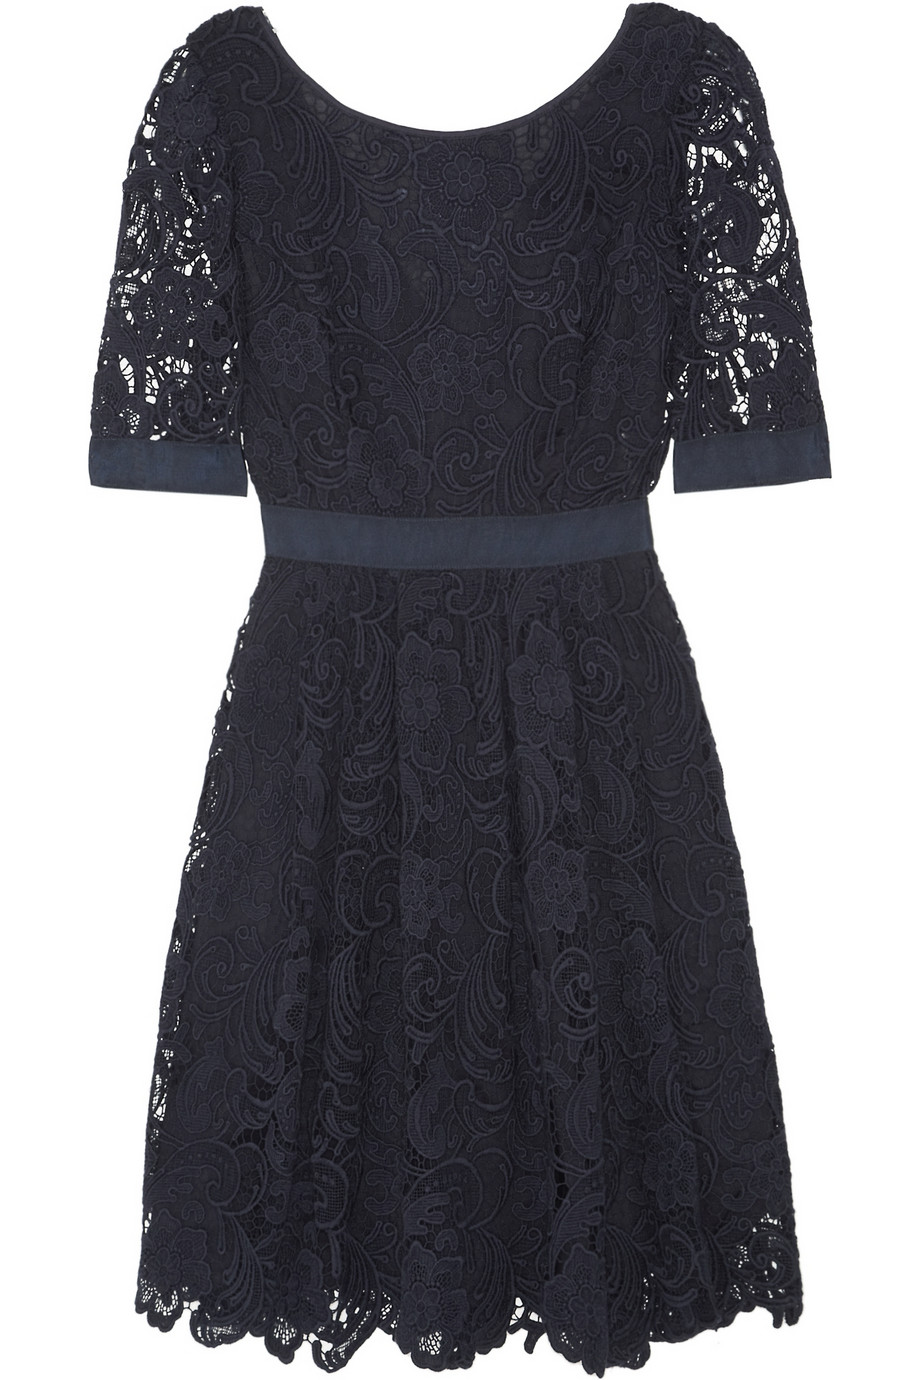 Collette By Collette Dinnigan Cotton-lace Dress in Blue (navy) | Lyst